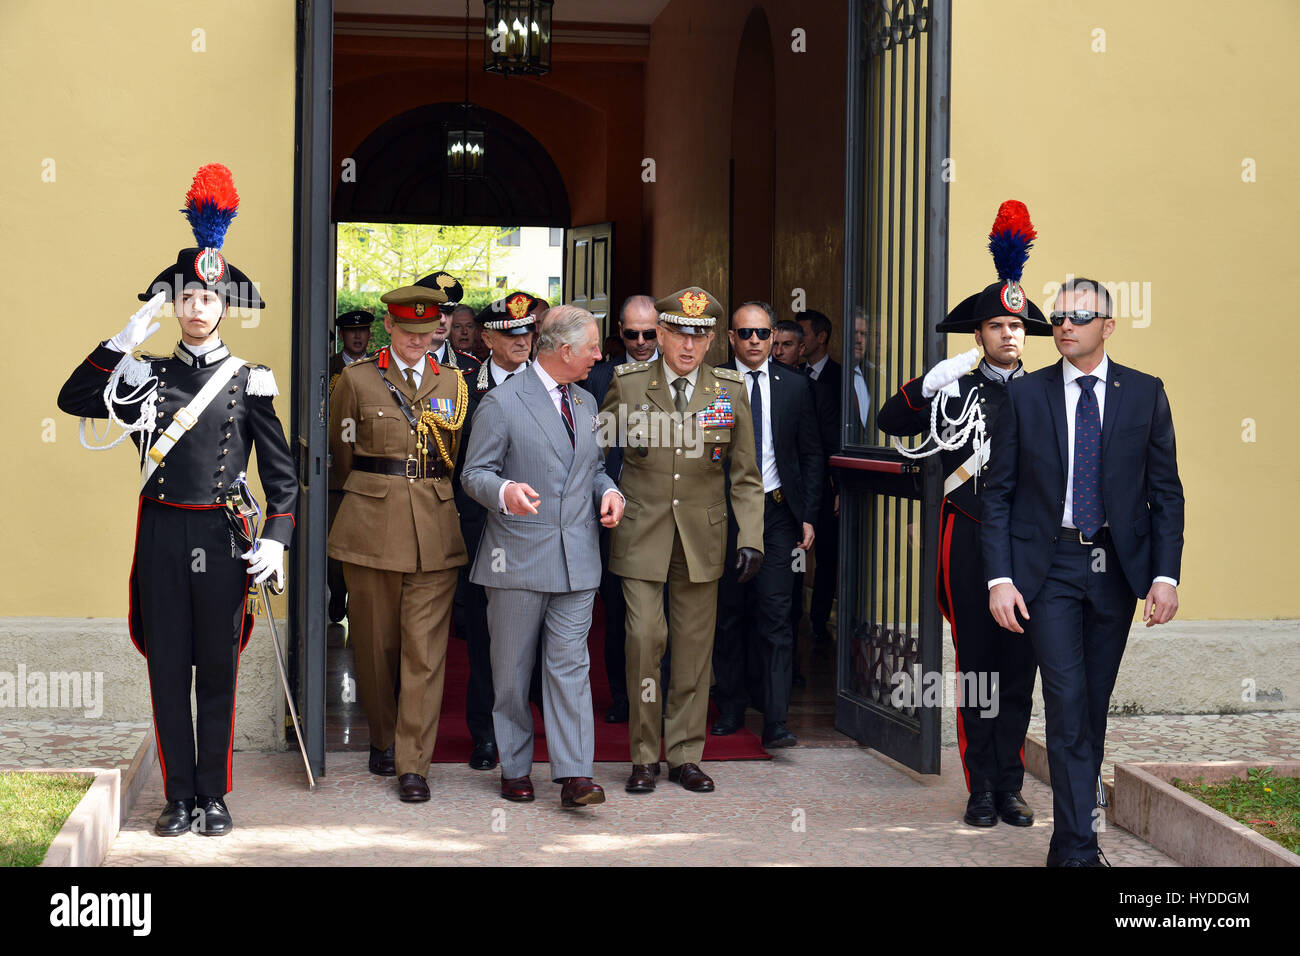 Charles, Prince of Wales walks with Gen. Claudio Graziano, Italian Army Chief of Staff, right, during a visit to the Center of Excellence for Stability Police Units April 1, 2017 in Vicenza, Italy. The center is a train the trainer school developed by the Carabinieri for peace-keeping missions around the world. Stock Photo